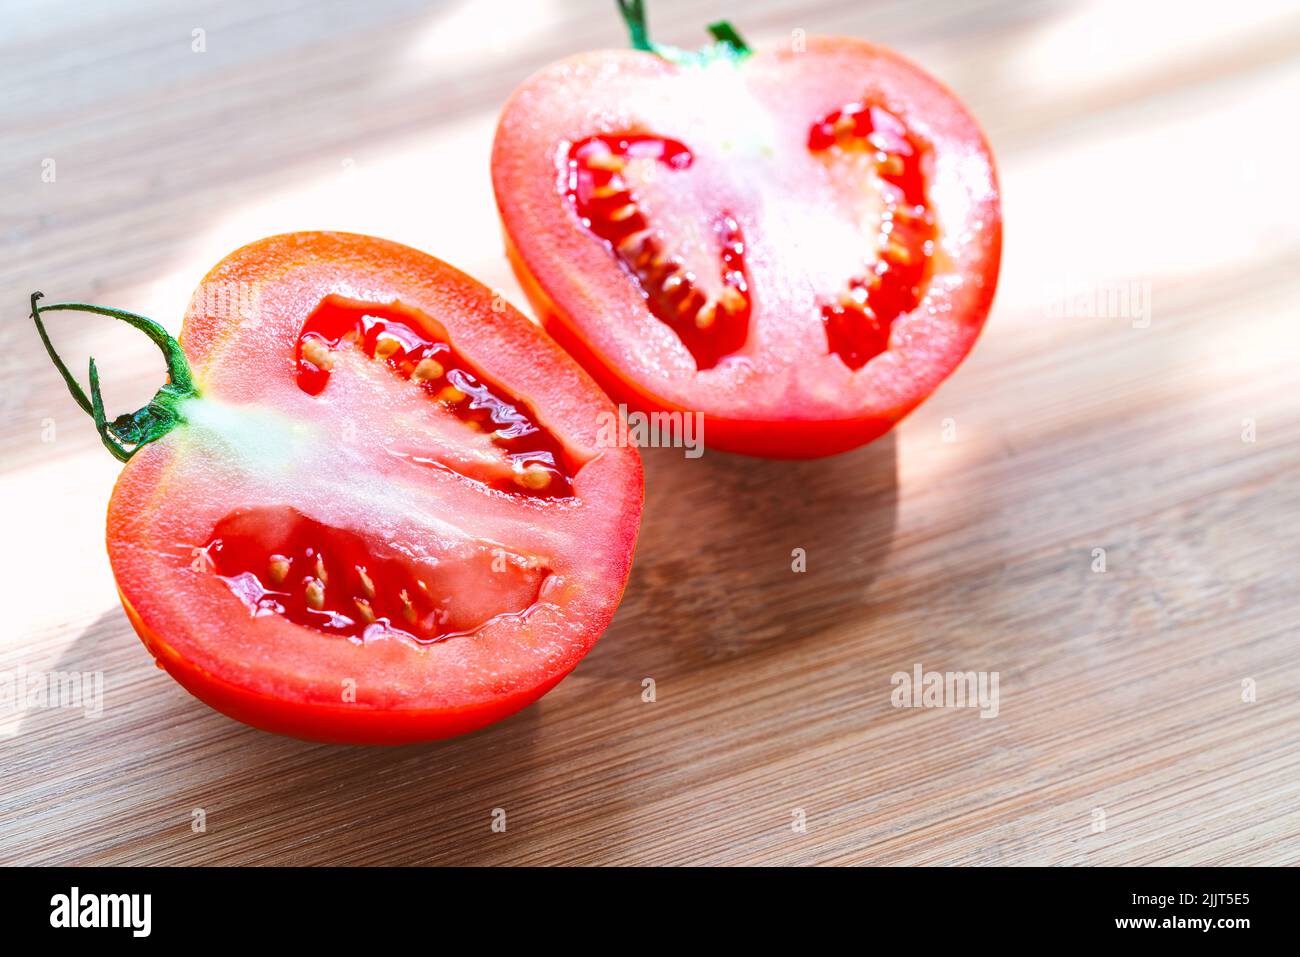 Close up cut-half of two red juicy tomatoes on wooden cutting board, fresh two half-cut tomatoes with natural light. Stock Photo